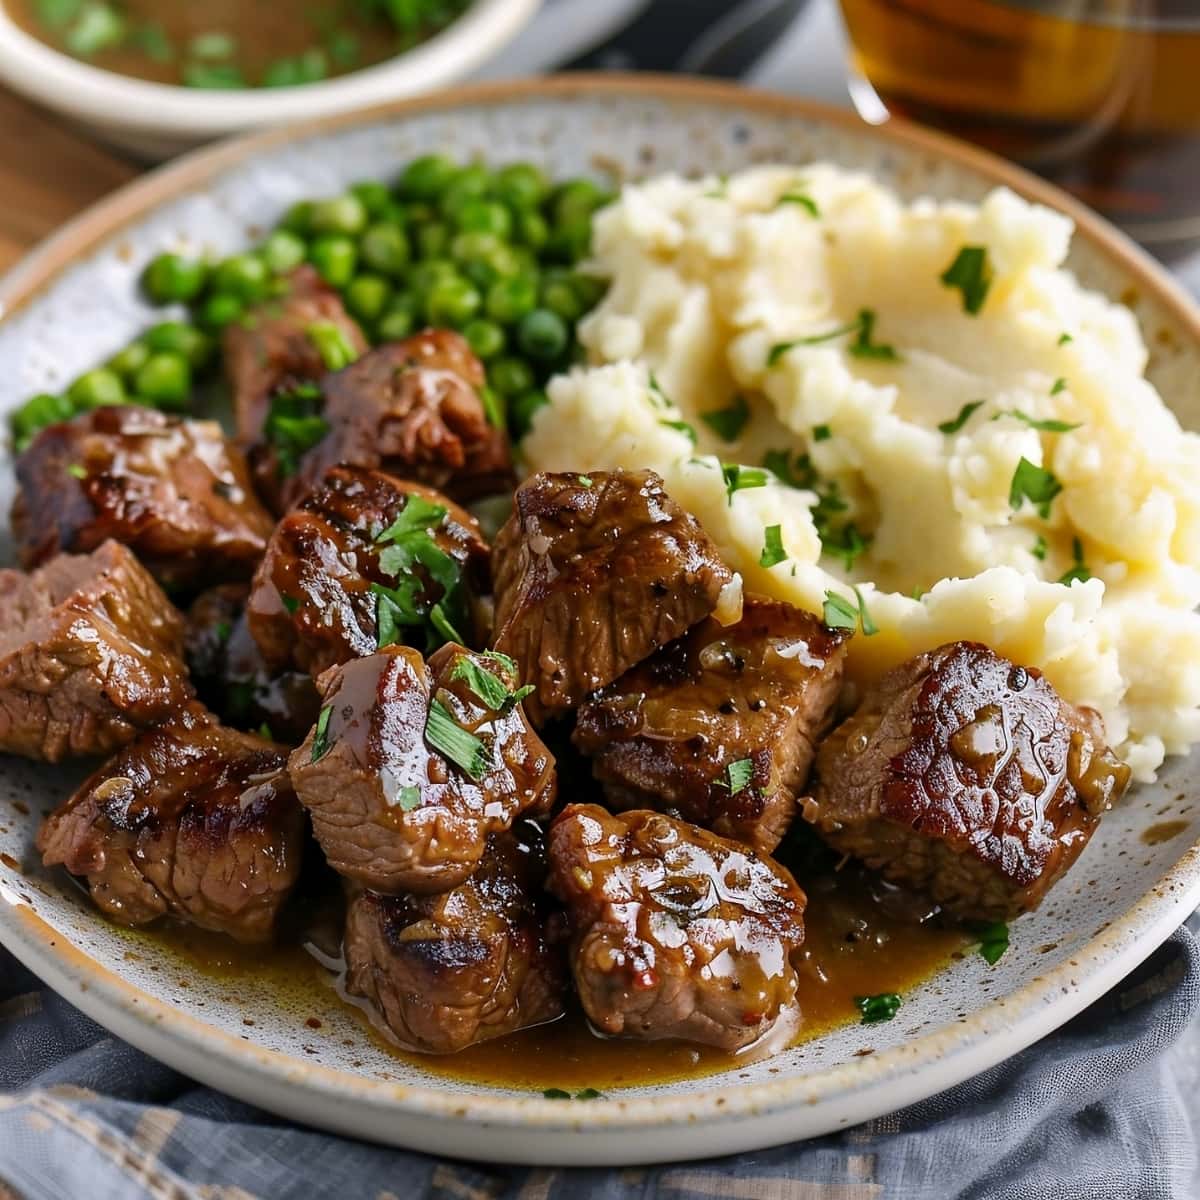 Homemade garlic butter steak bites served with mashed potates and green peas